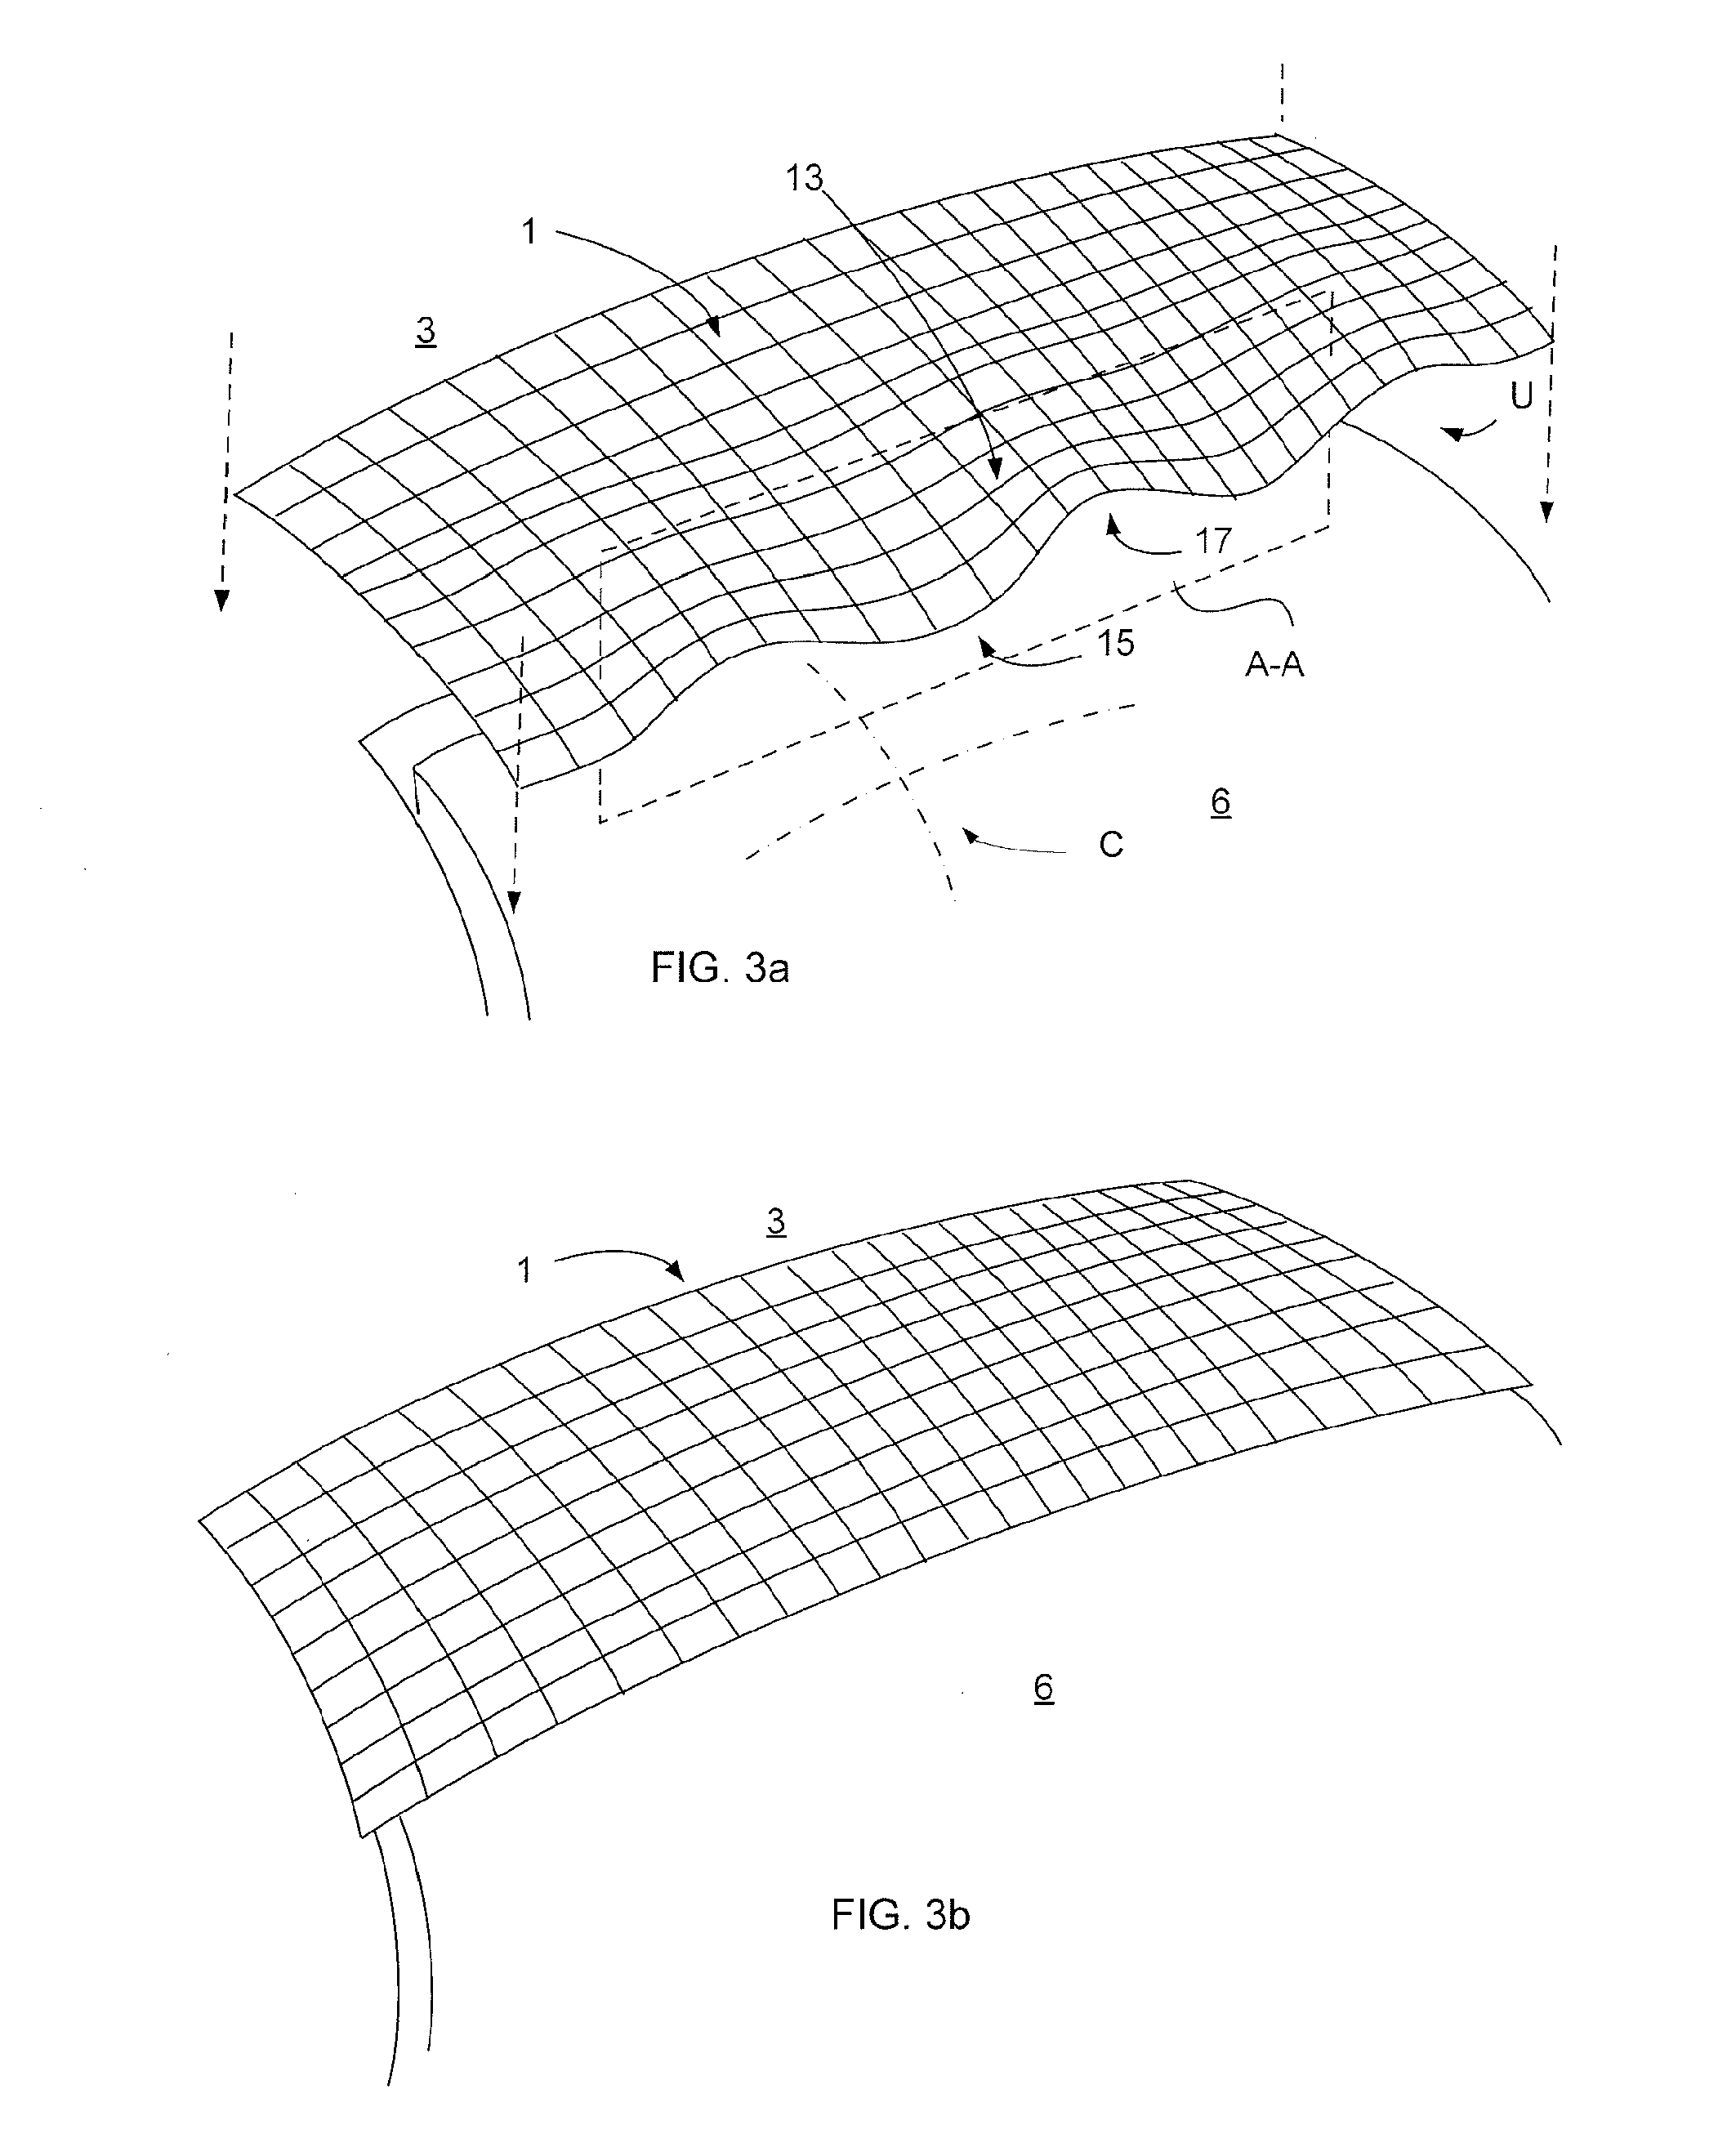 Double-curved cover for covering a gap between two structural portions of an aircraft